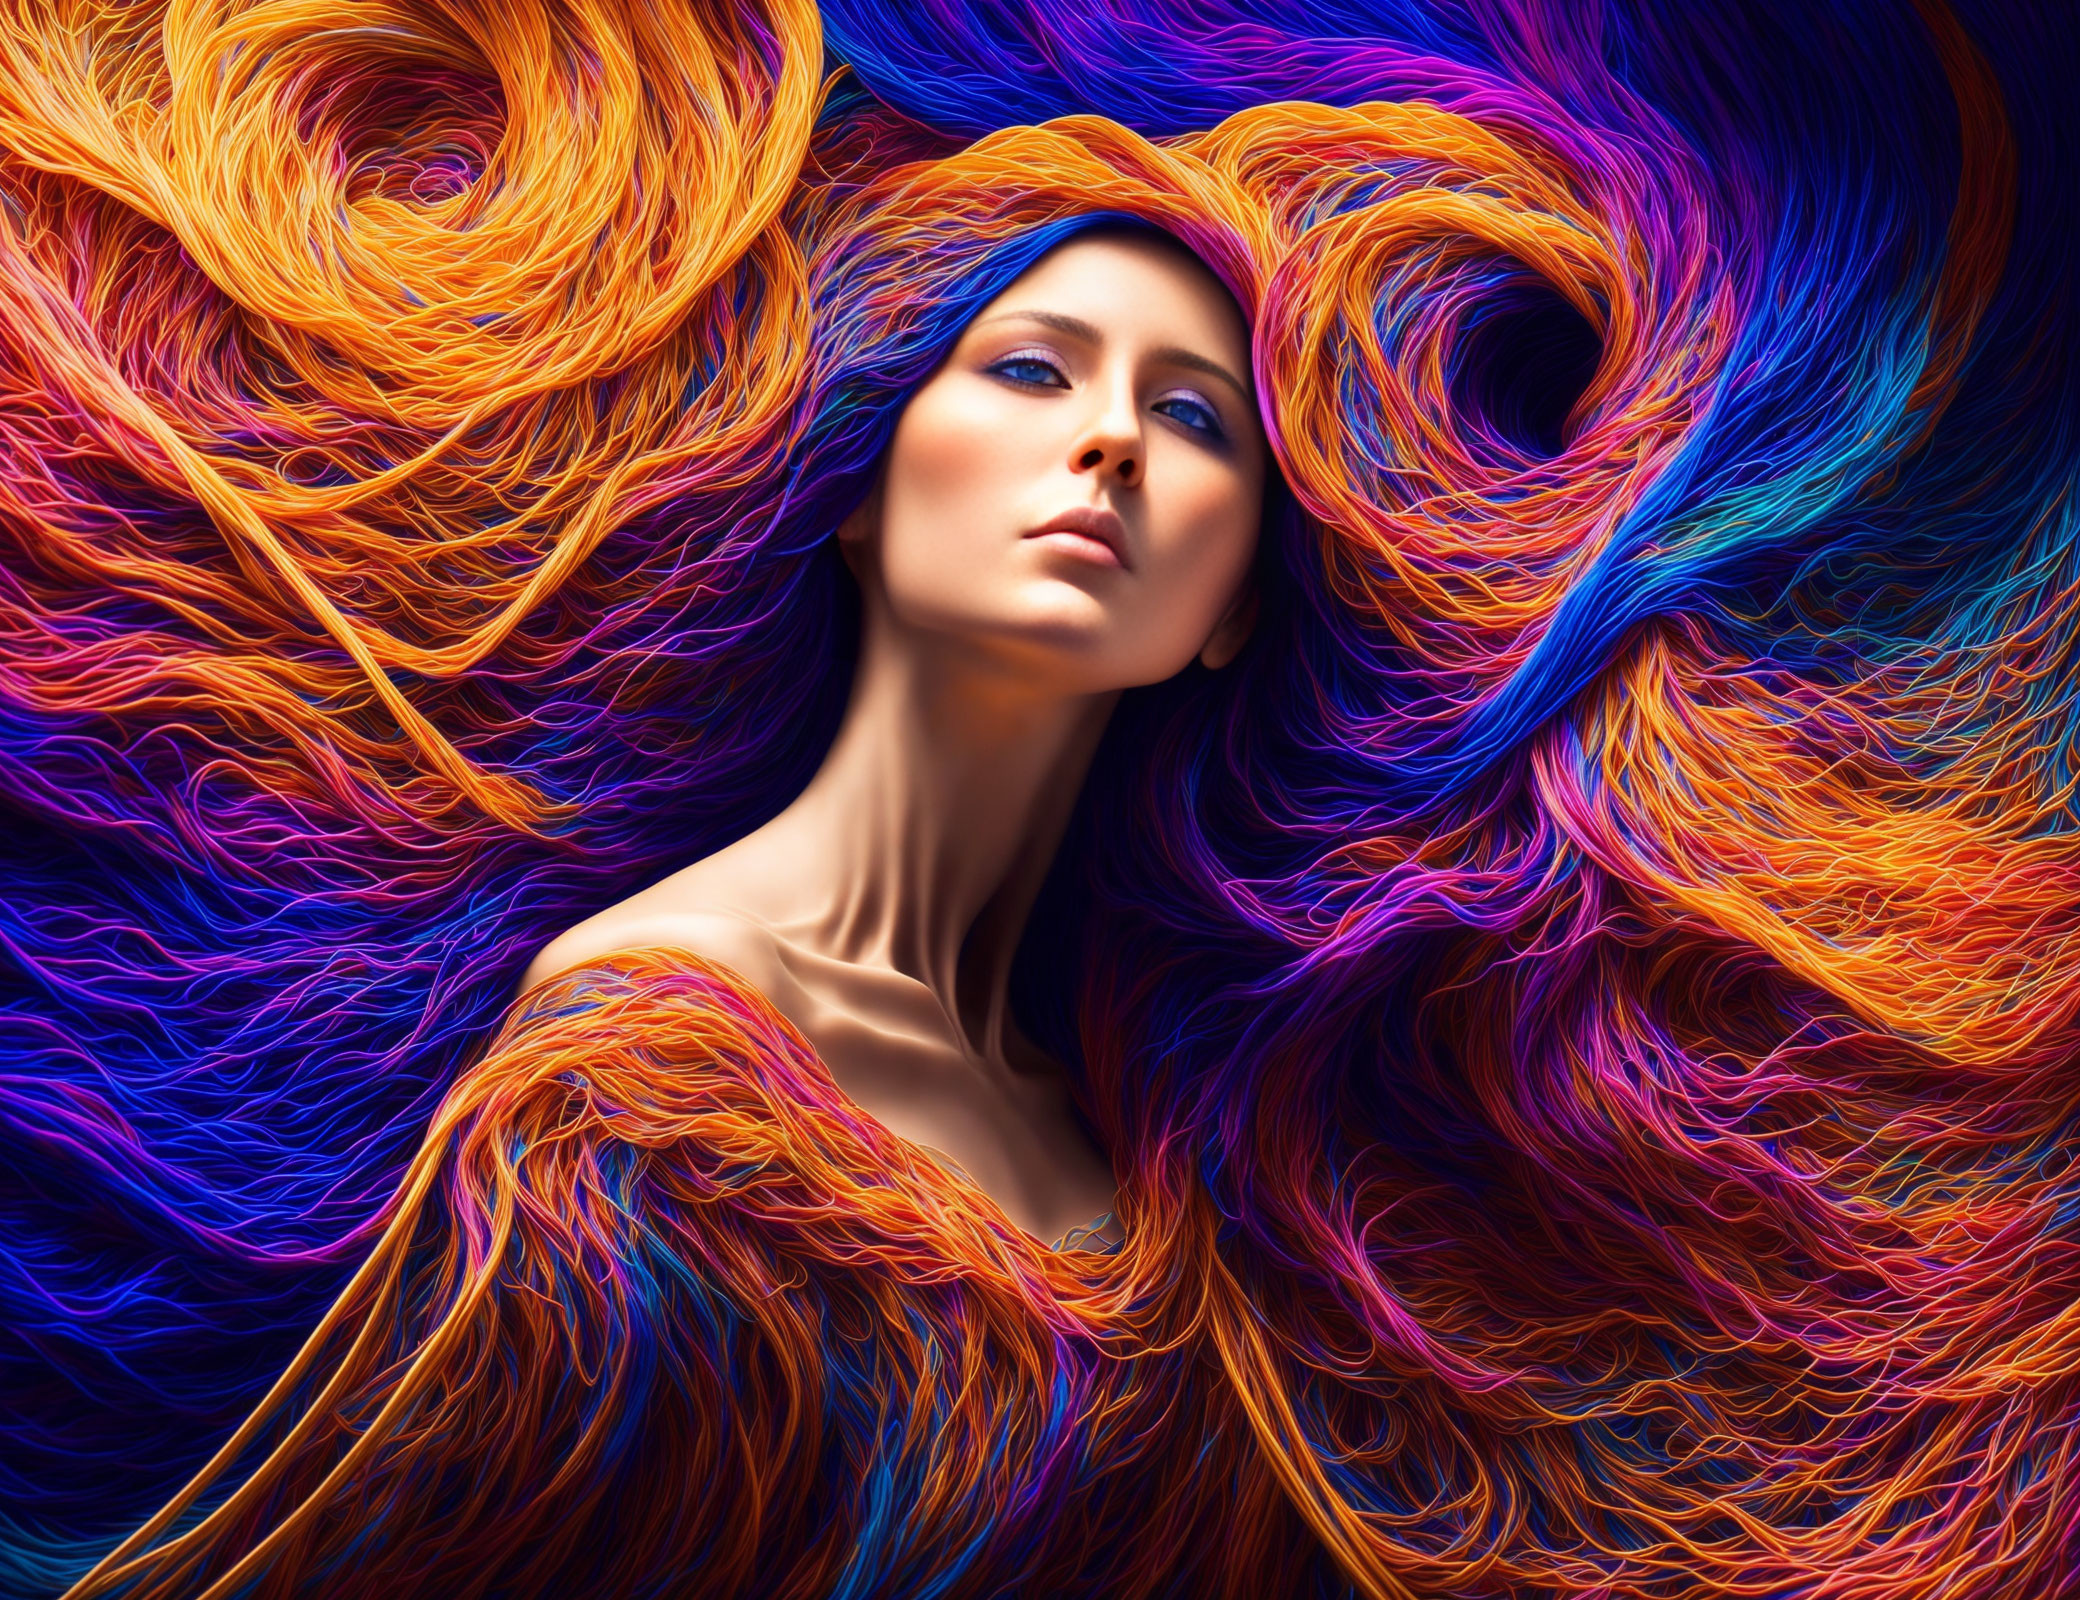 Vibrant multicolored hair flowing like waves on a woman